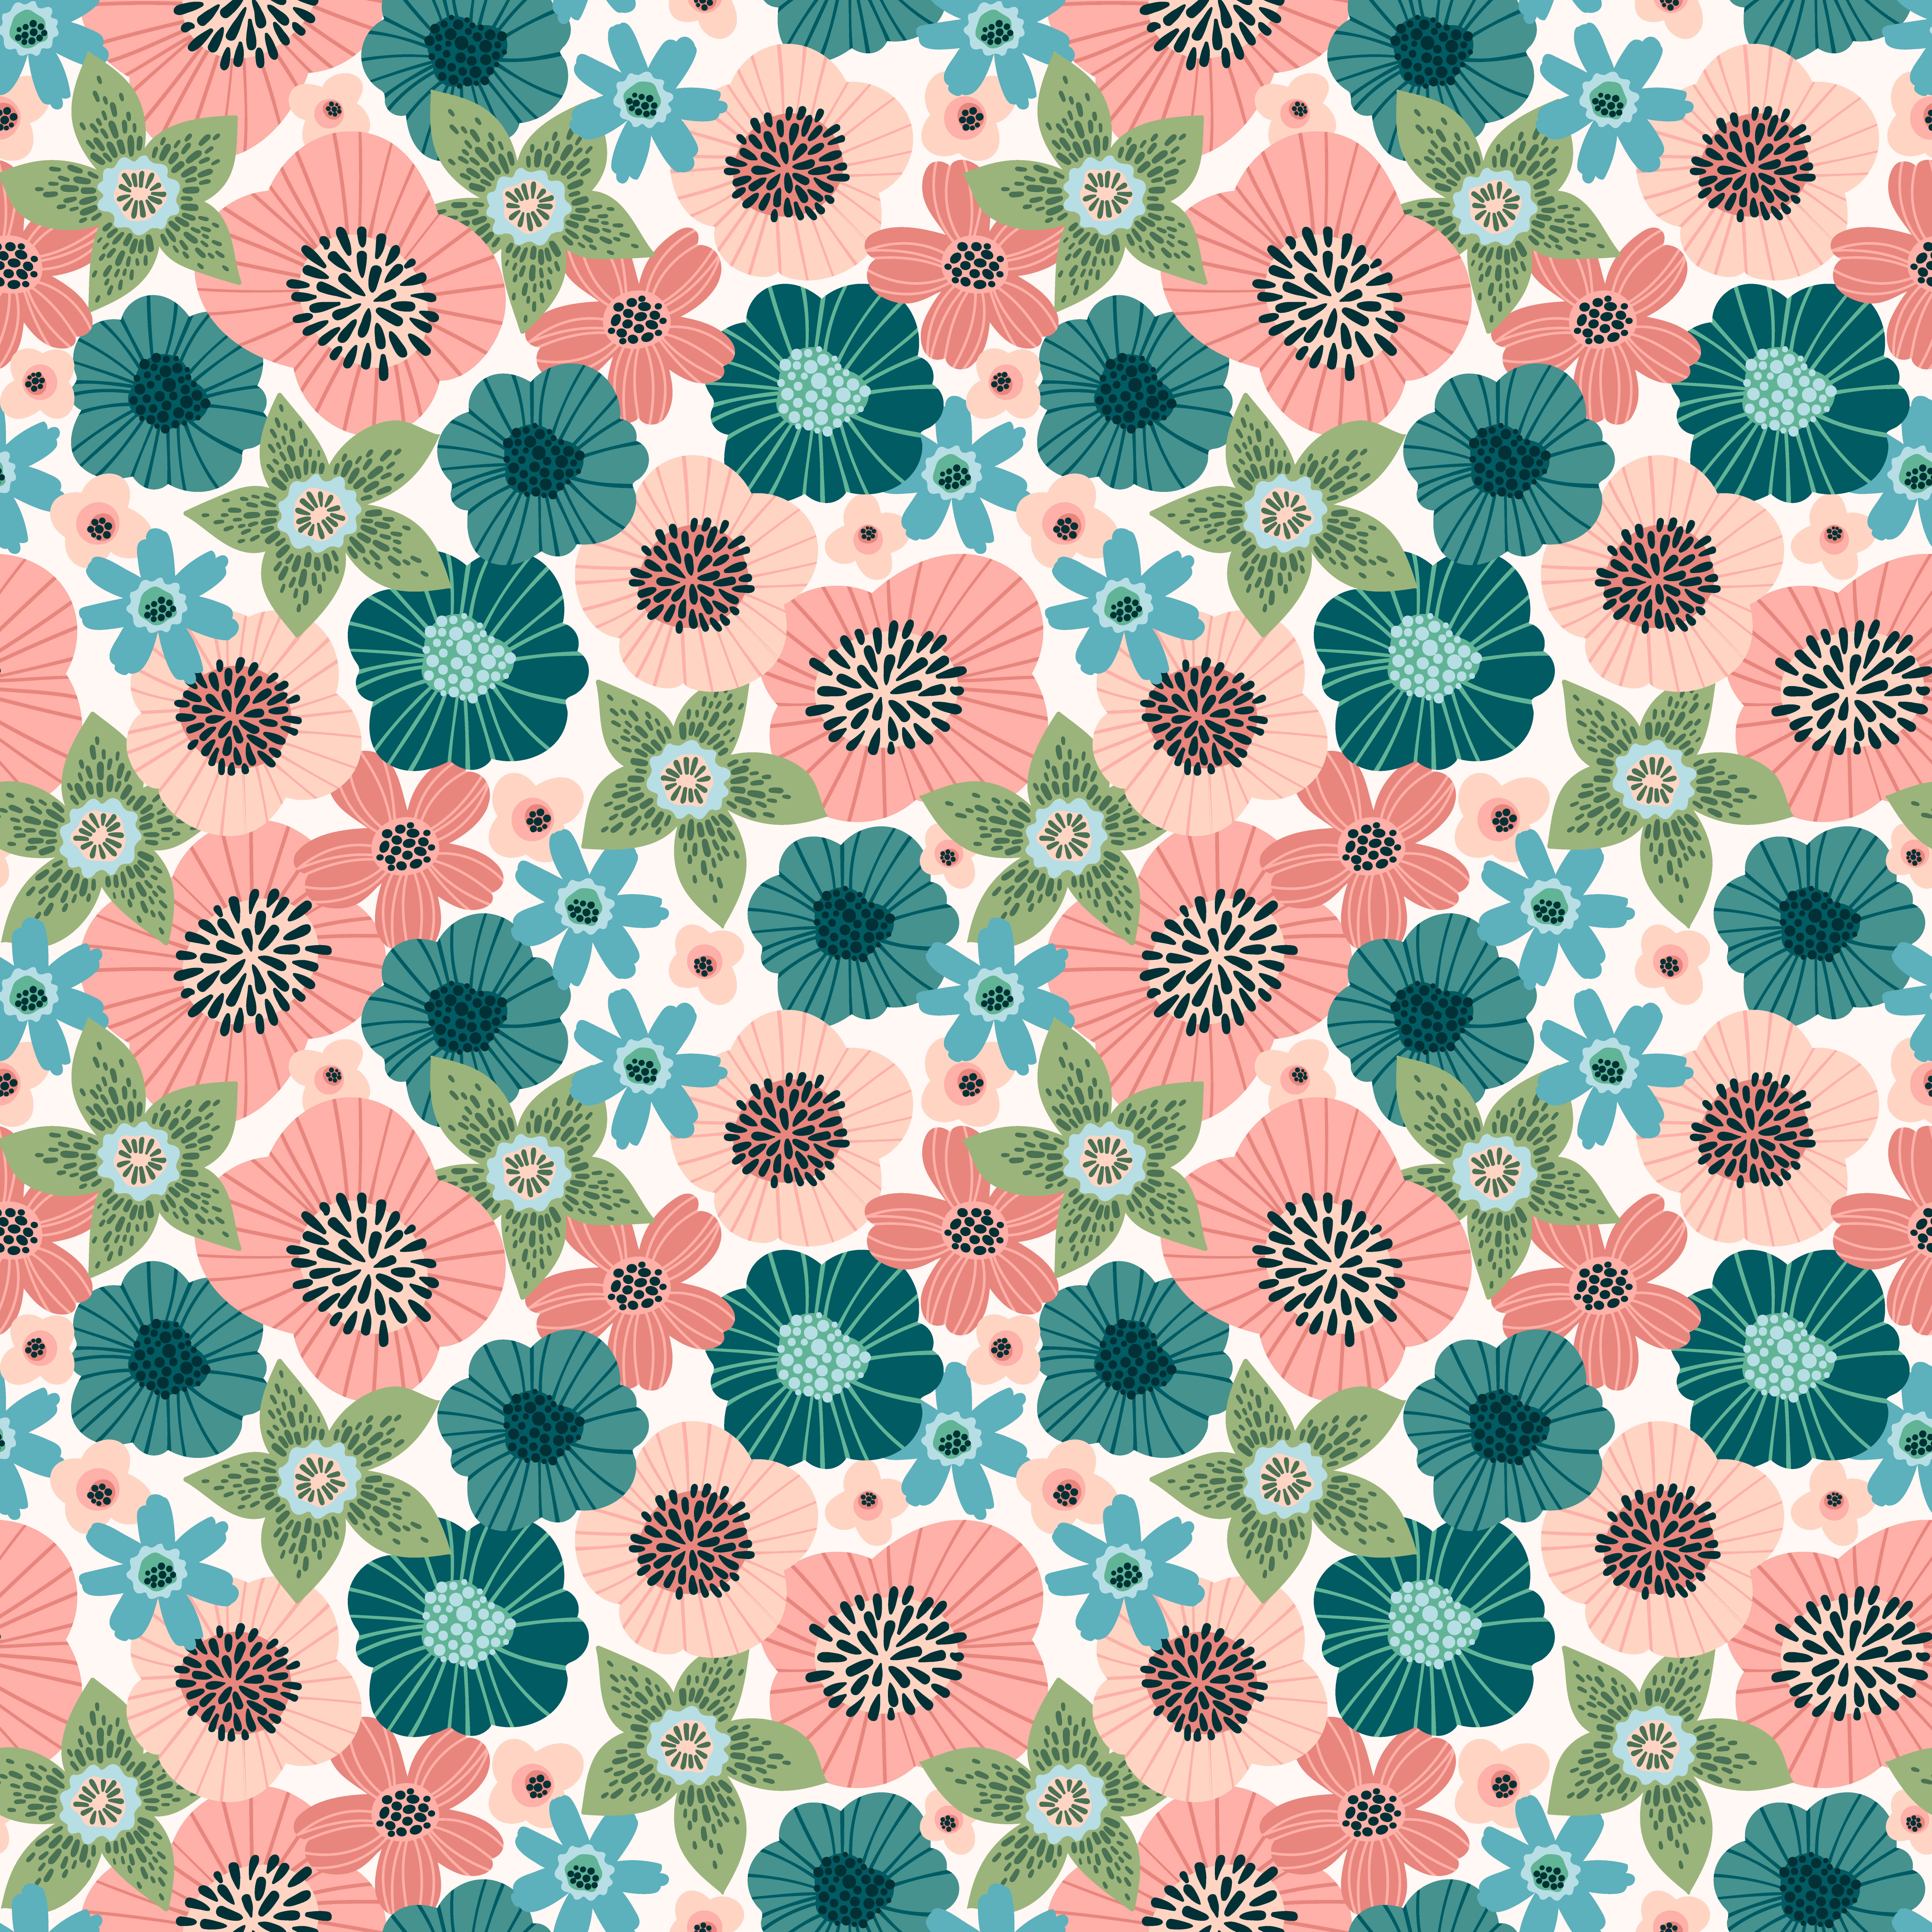 Floral seamless pattern. Vector design for paper, cover, fabric